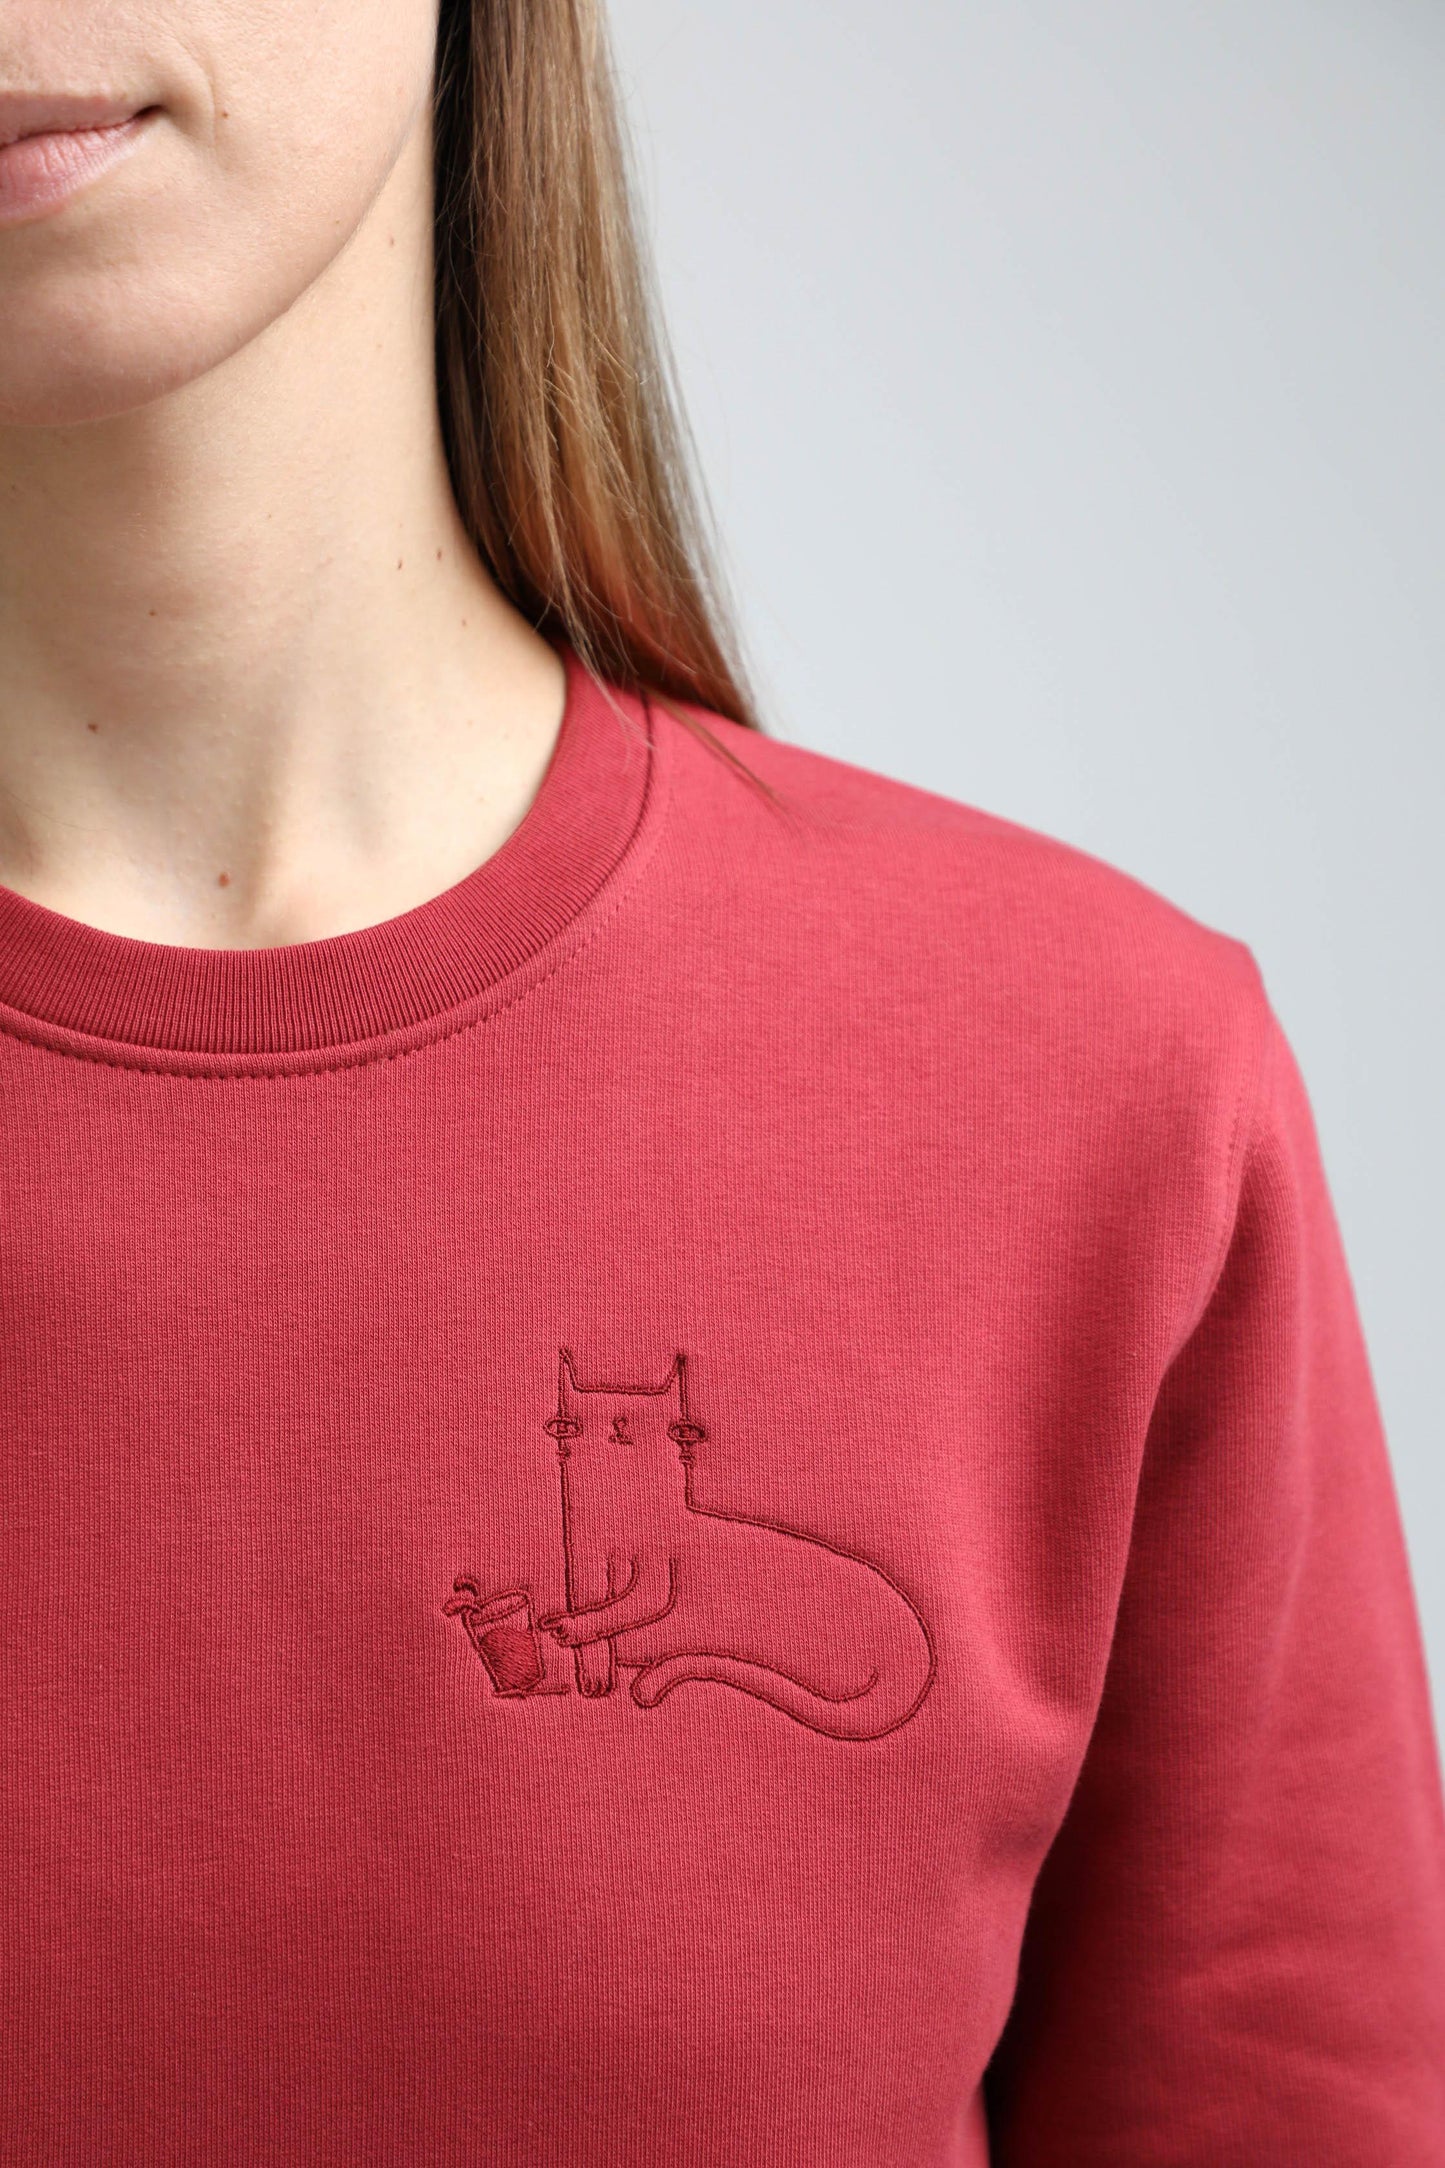 S available only | Cat | Crew neck sweatshirt with embroidered cat. Regular fit | Unisex - premium dog goods handmade in Europe by animalistus